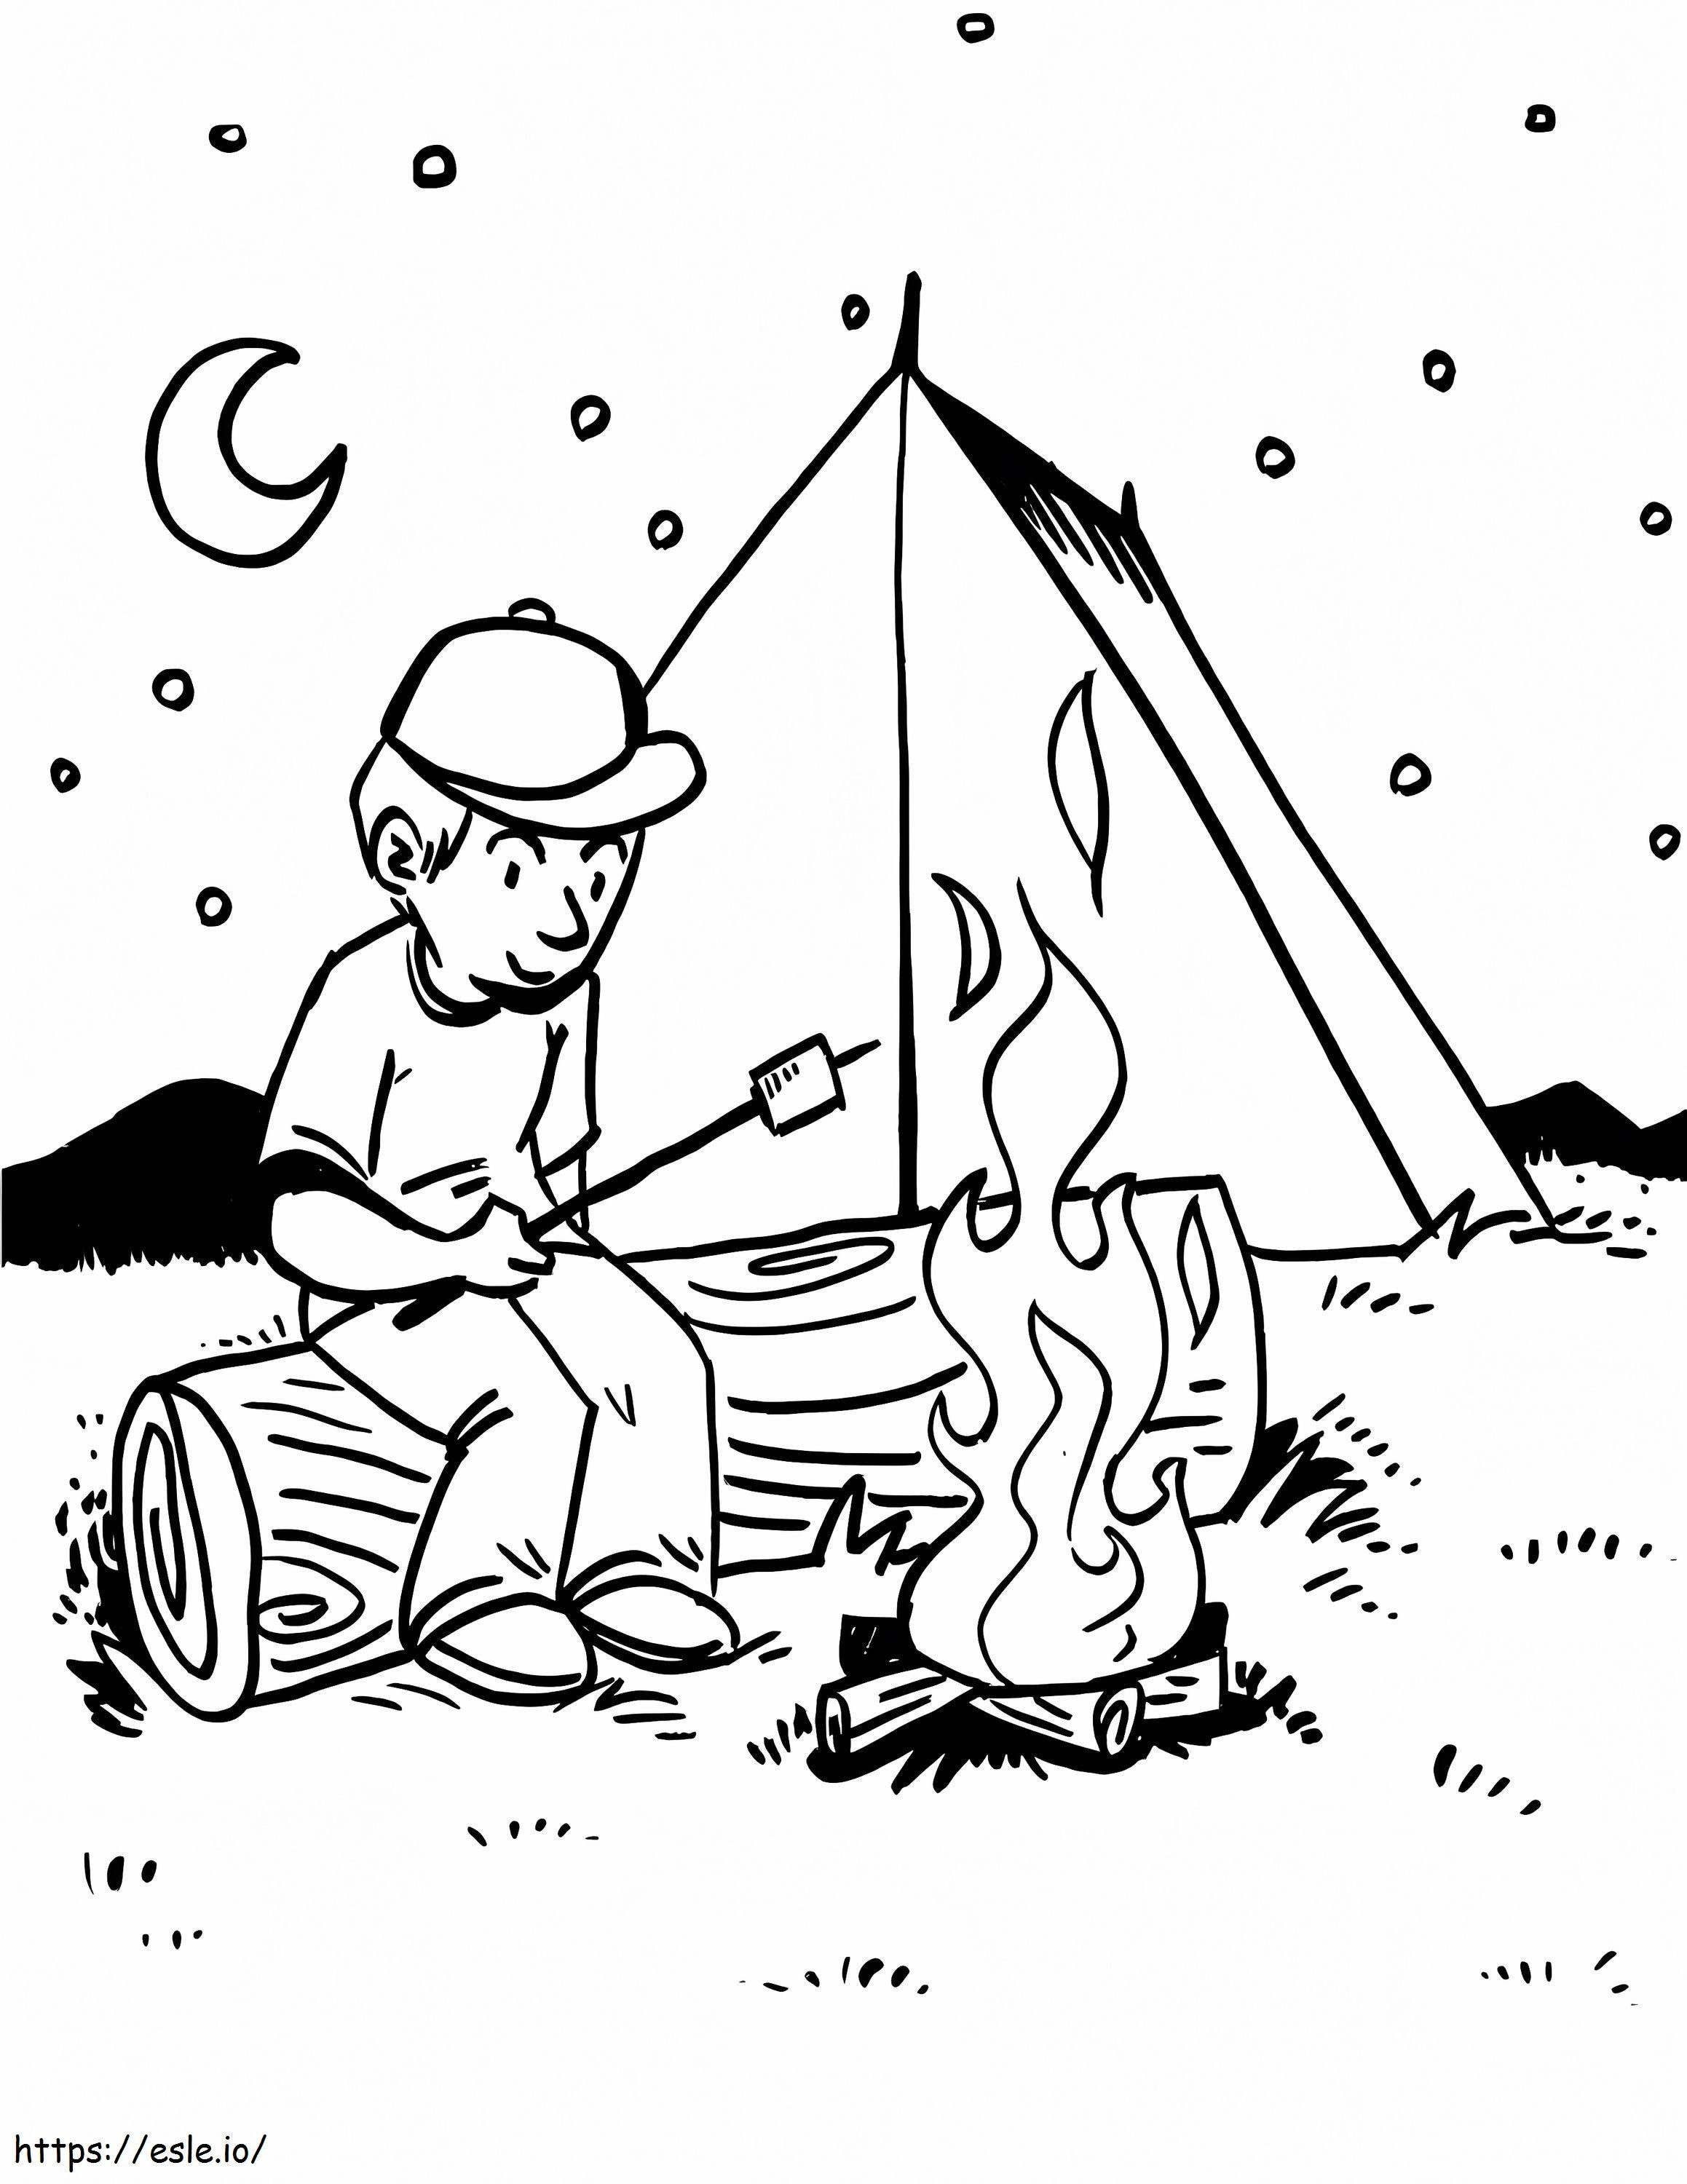 Boy Camping coloring page